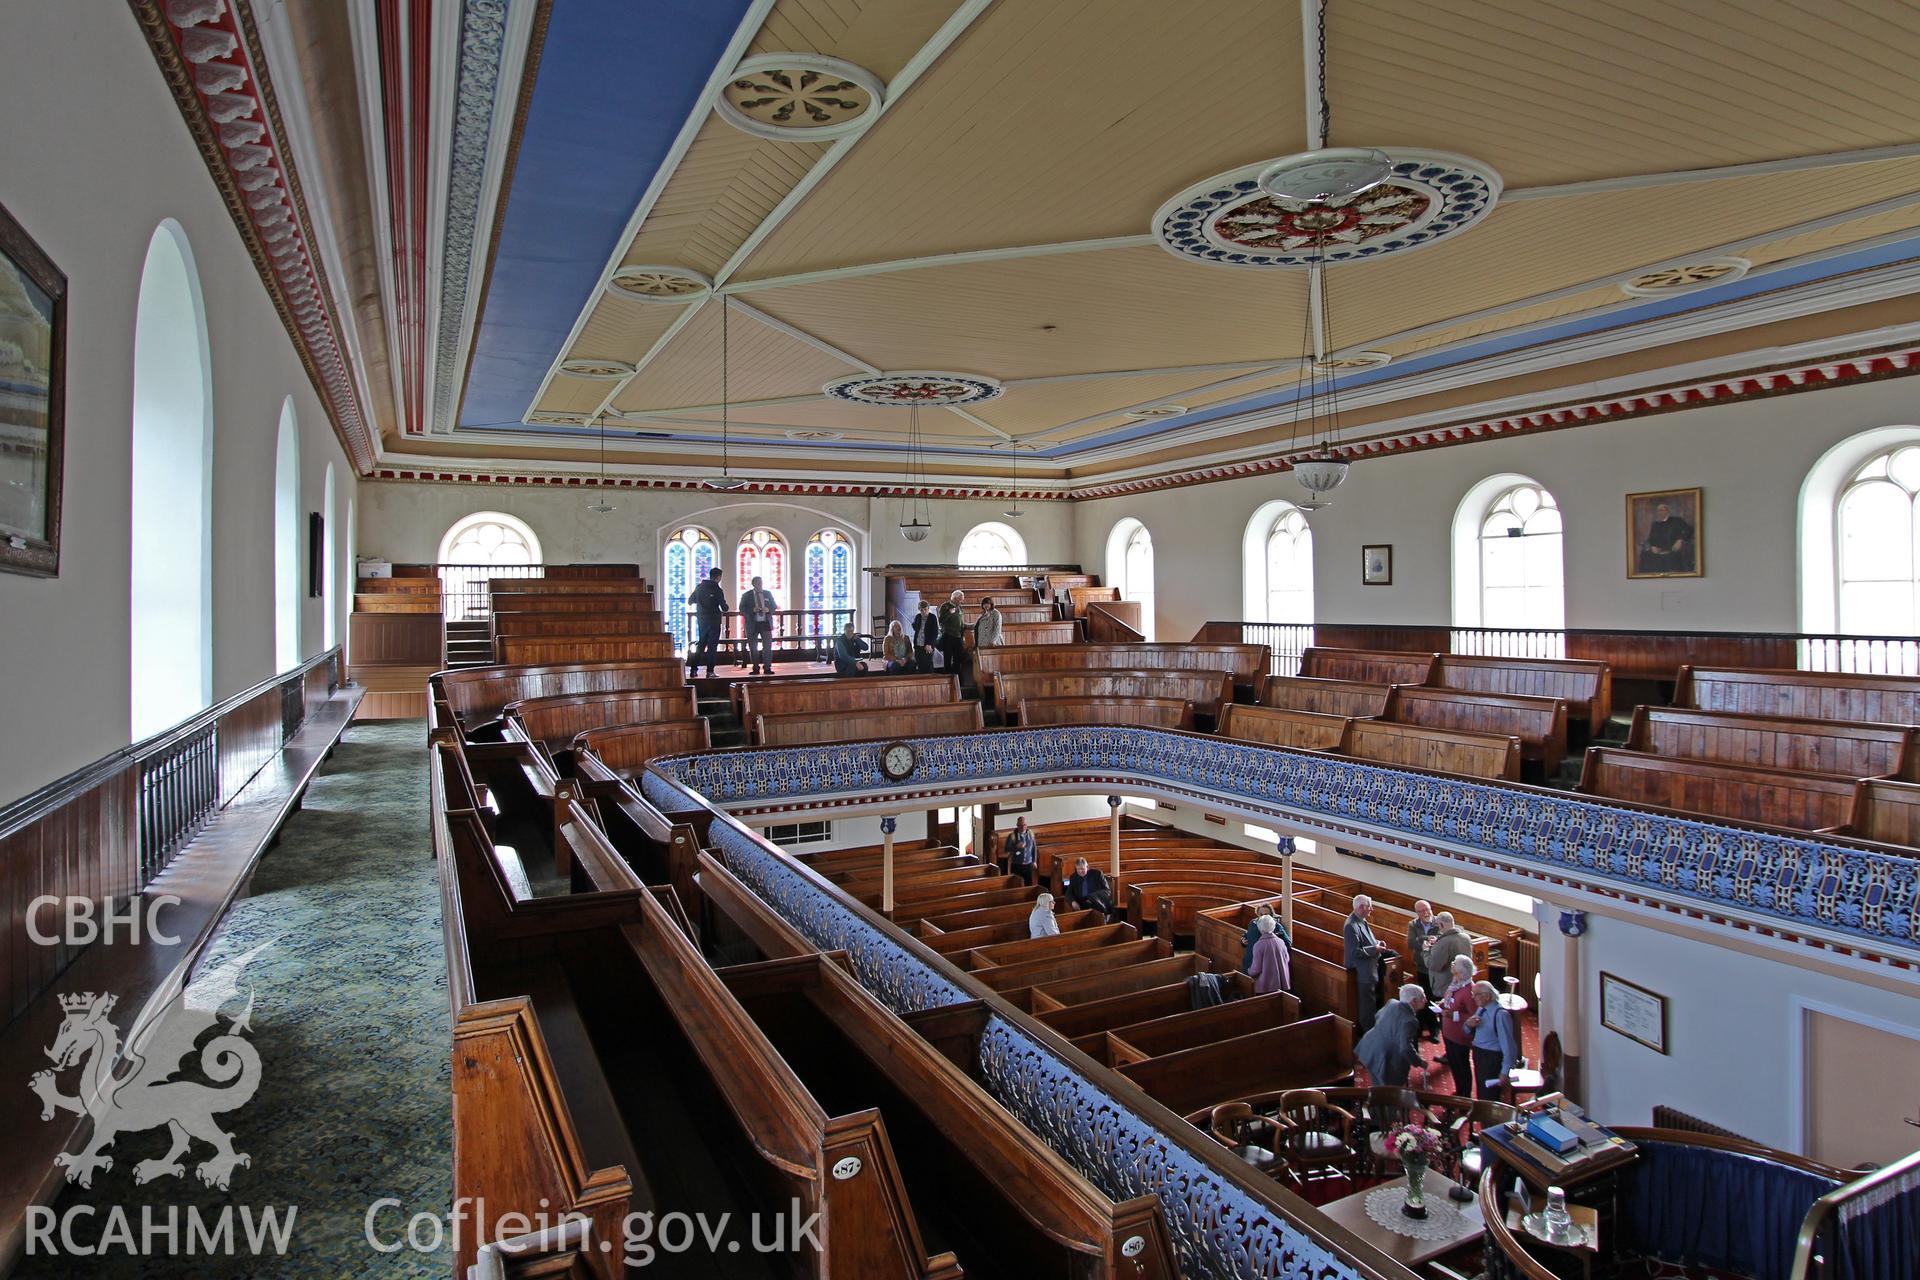 Interior view of chapel from first floor balcony. Photographic survey of Seion Welsh Baptist Chapel, Morriston, conducted by Sue Fielding on 13th May 2017.